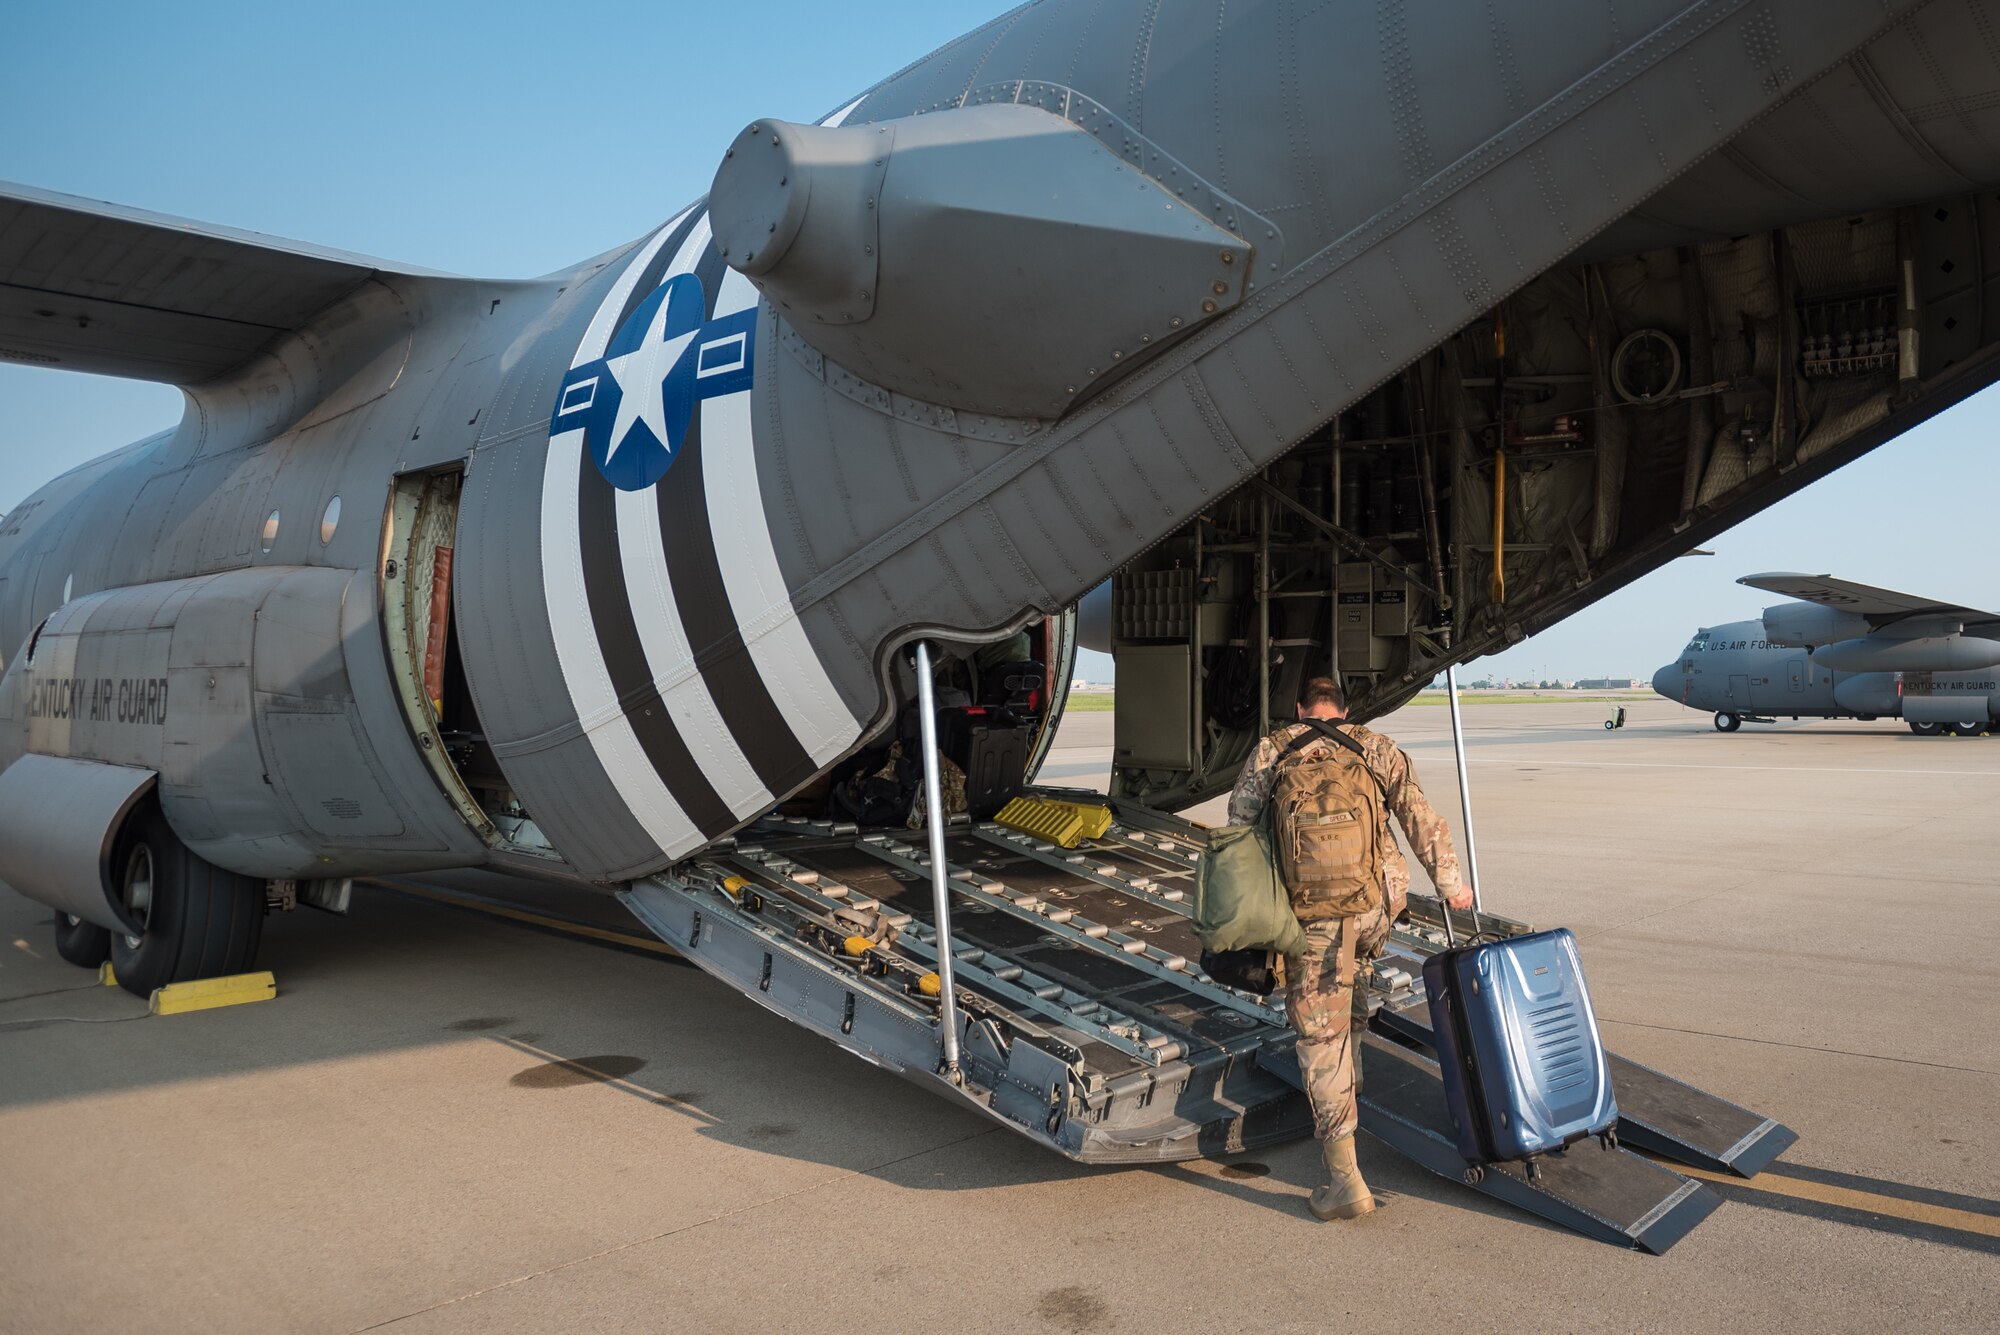 Master Sgt. Phil Speck, Public Affairs superintendent for the 123rd Airlift Wing, boards a C-130 Hercules aircraft at the Kentucky Air National Guard Base in Louisville, Ky., June 1, 2019, en route to France. Speck and 30 other Kentucky Air Guardsmen will participate in the 75th-anniversary reenactment of D-Day there. Two Kentucky C-130s will airdrop U.S. Army paratroopers over Normandy on June 9 as part of the commemoration. The aircraft has been striped with historically accurate Allied Forces livery in honor of the event, which turned the tide of World War II in the European theater. (U.S. Air National Guard photo by Dale Greer)